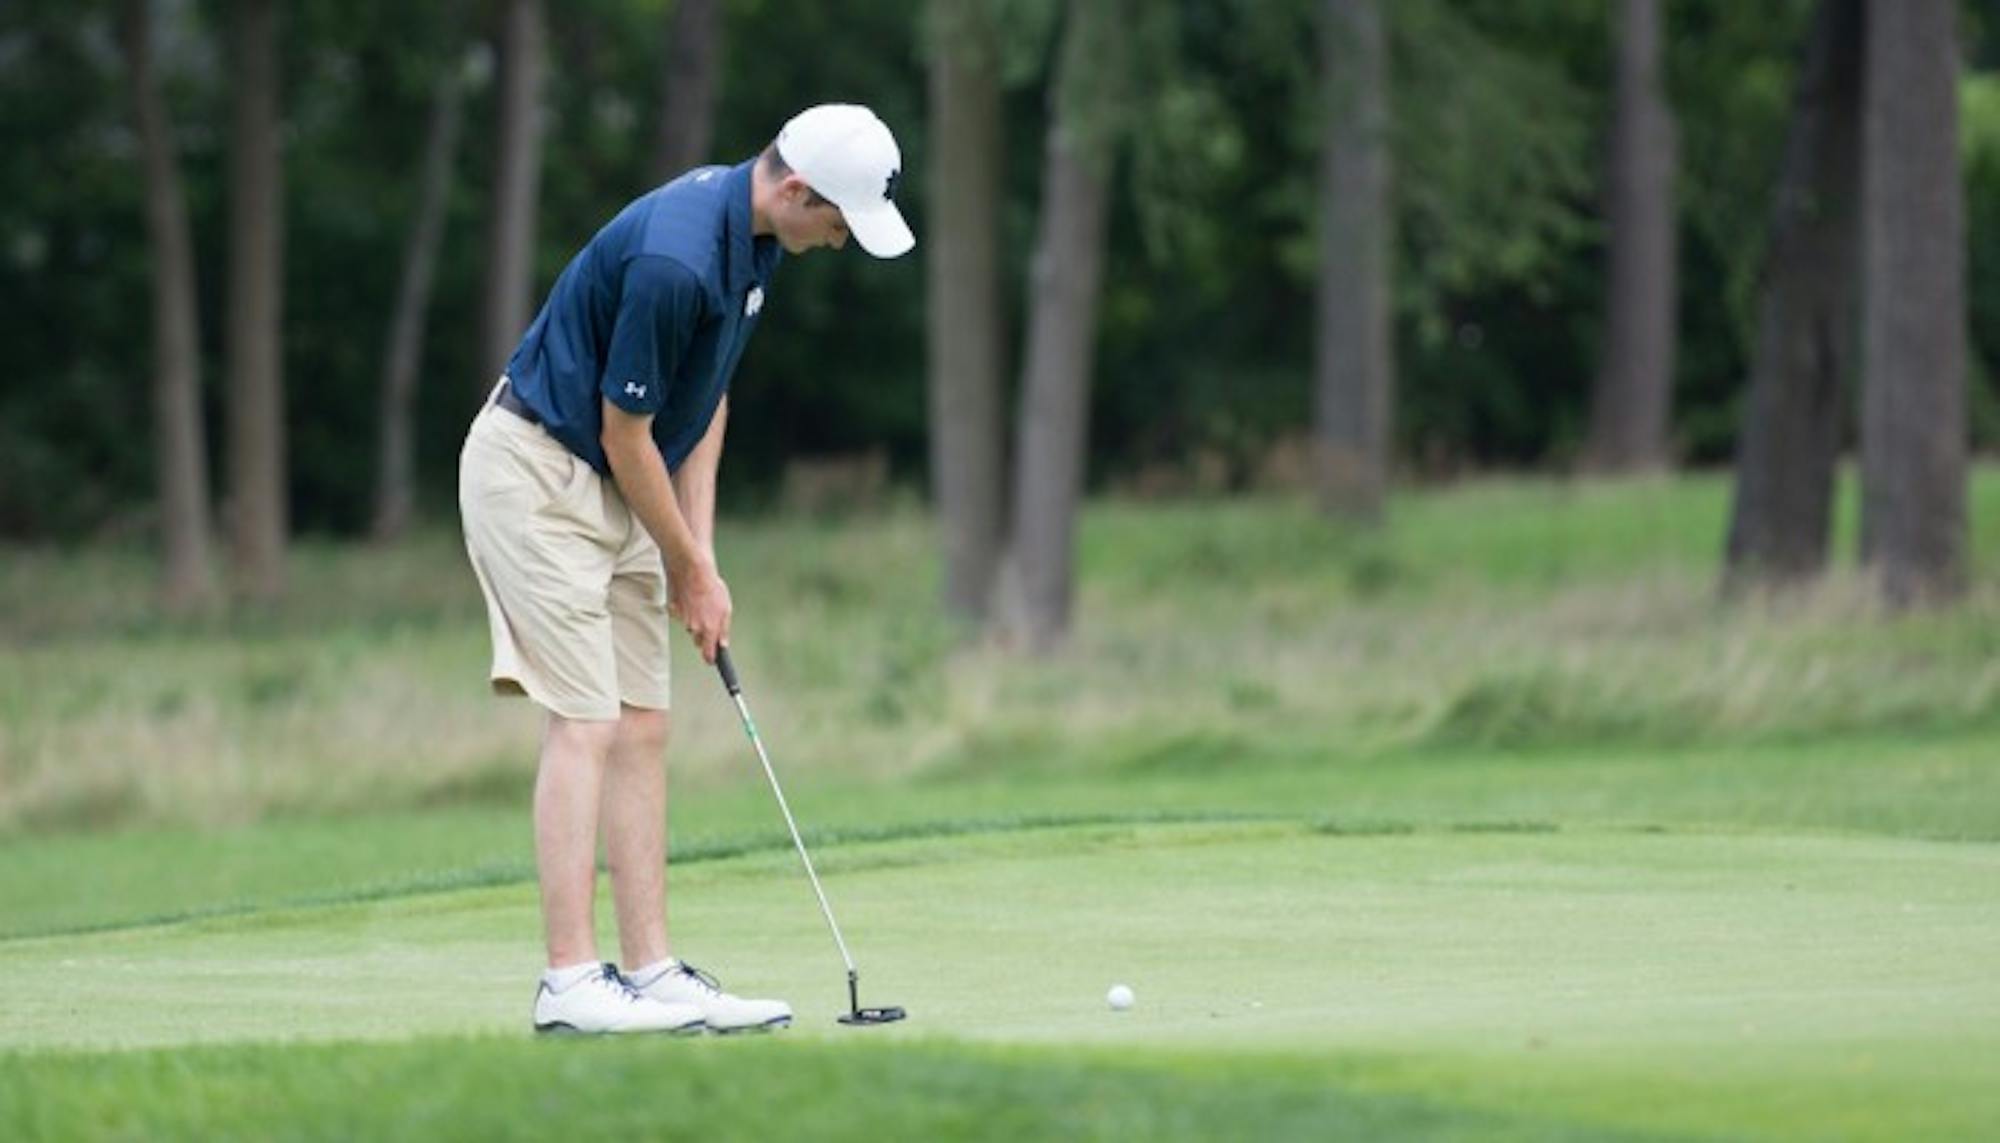 Junior Liam Cox rolls a putt on his way to a 16th place finish at the Notre Dame Kickoff Challenge, which took place at the Warren Golf Course on August 31, 2014. The Irish went on to win the tournament.